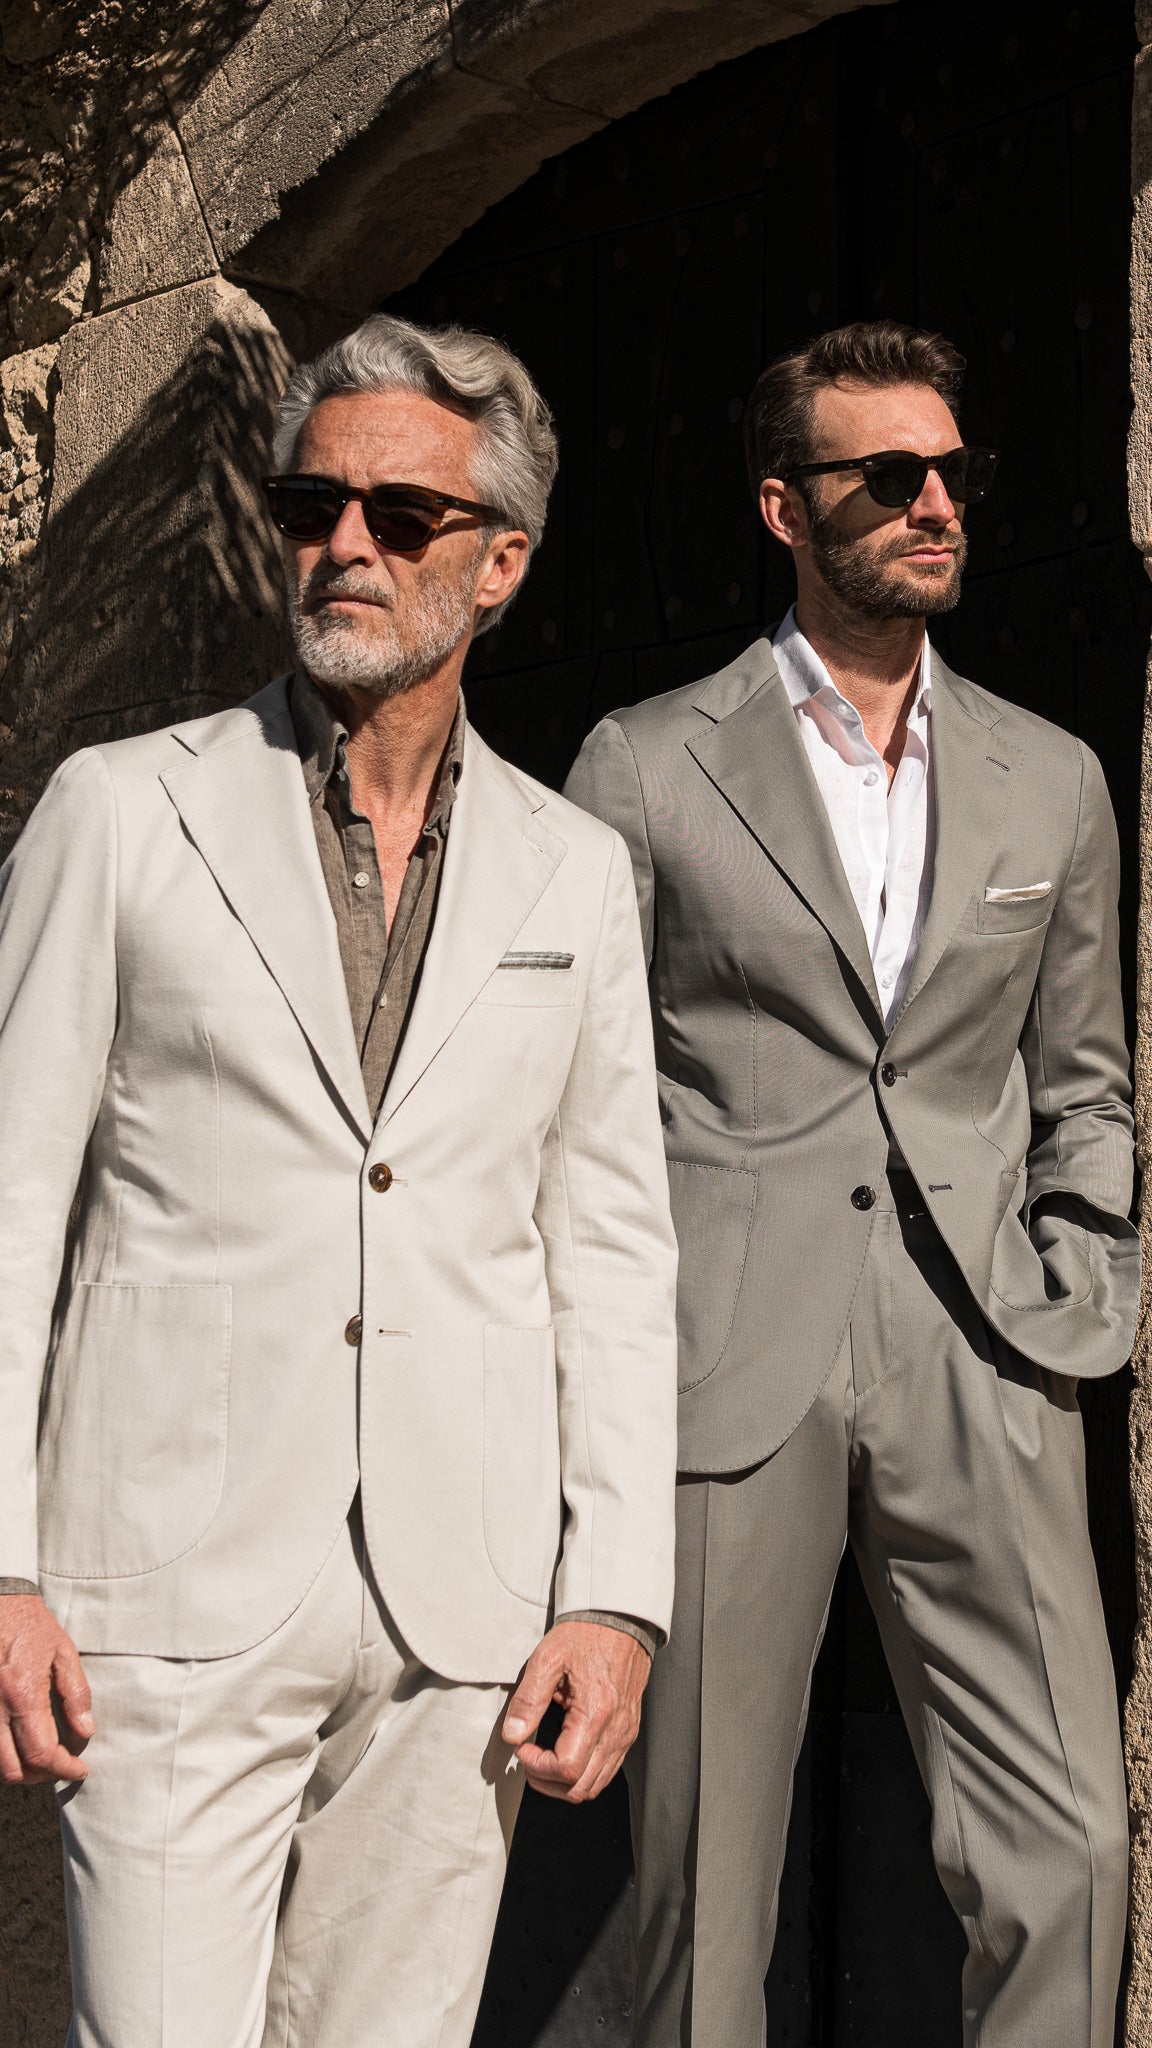 Pini Parma Pure Italian Style | Luxury Men's Clothes, Suits, & More